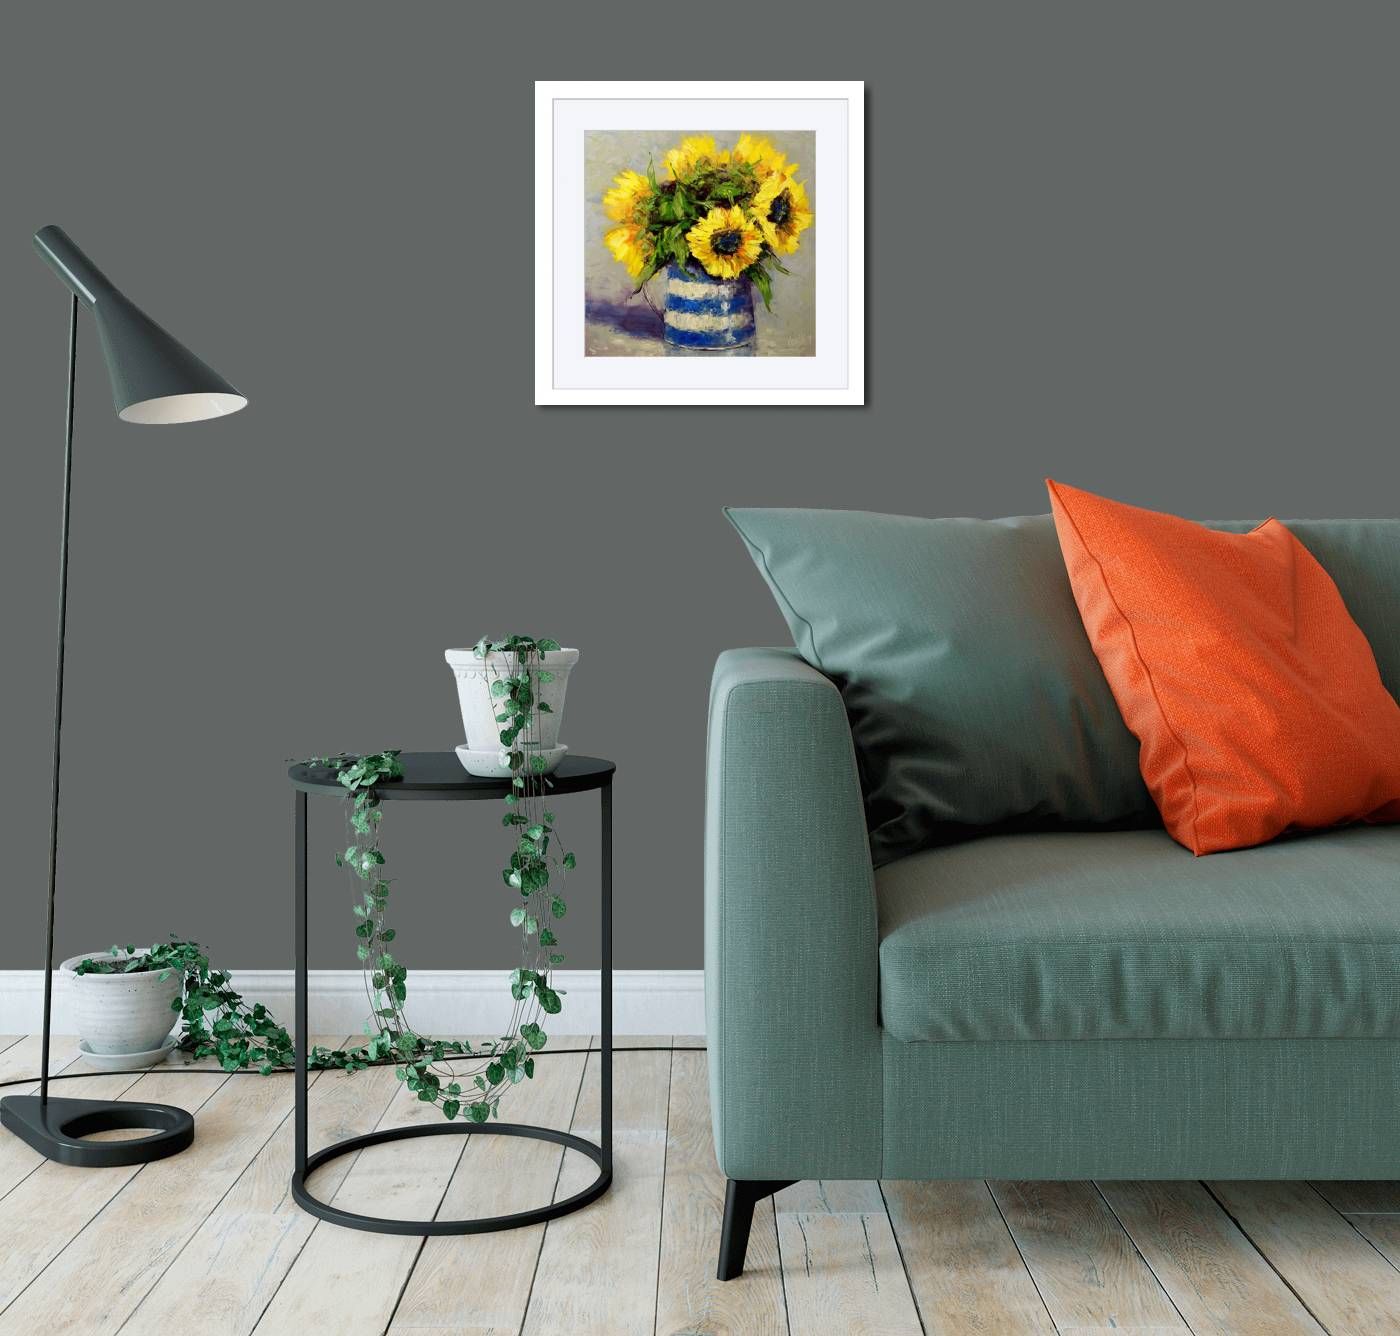 Large - SUNFLOWERS IN A JUG by Karen Wilson